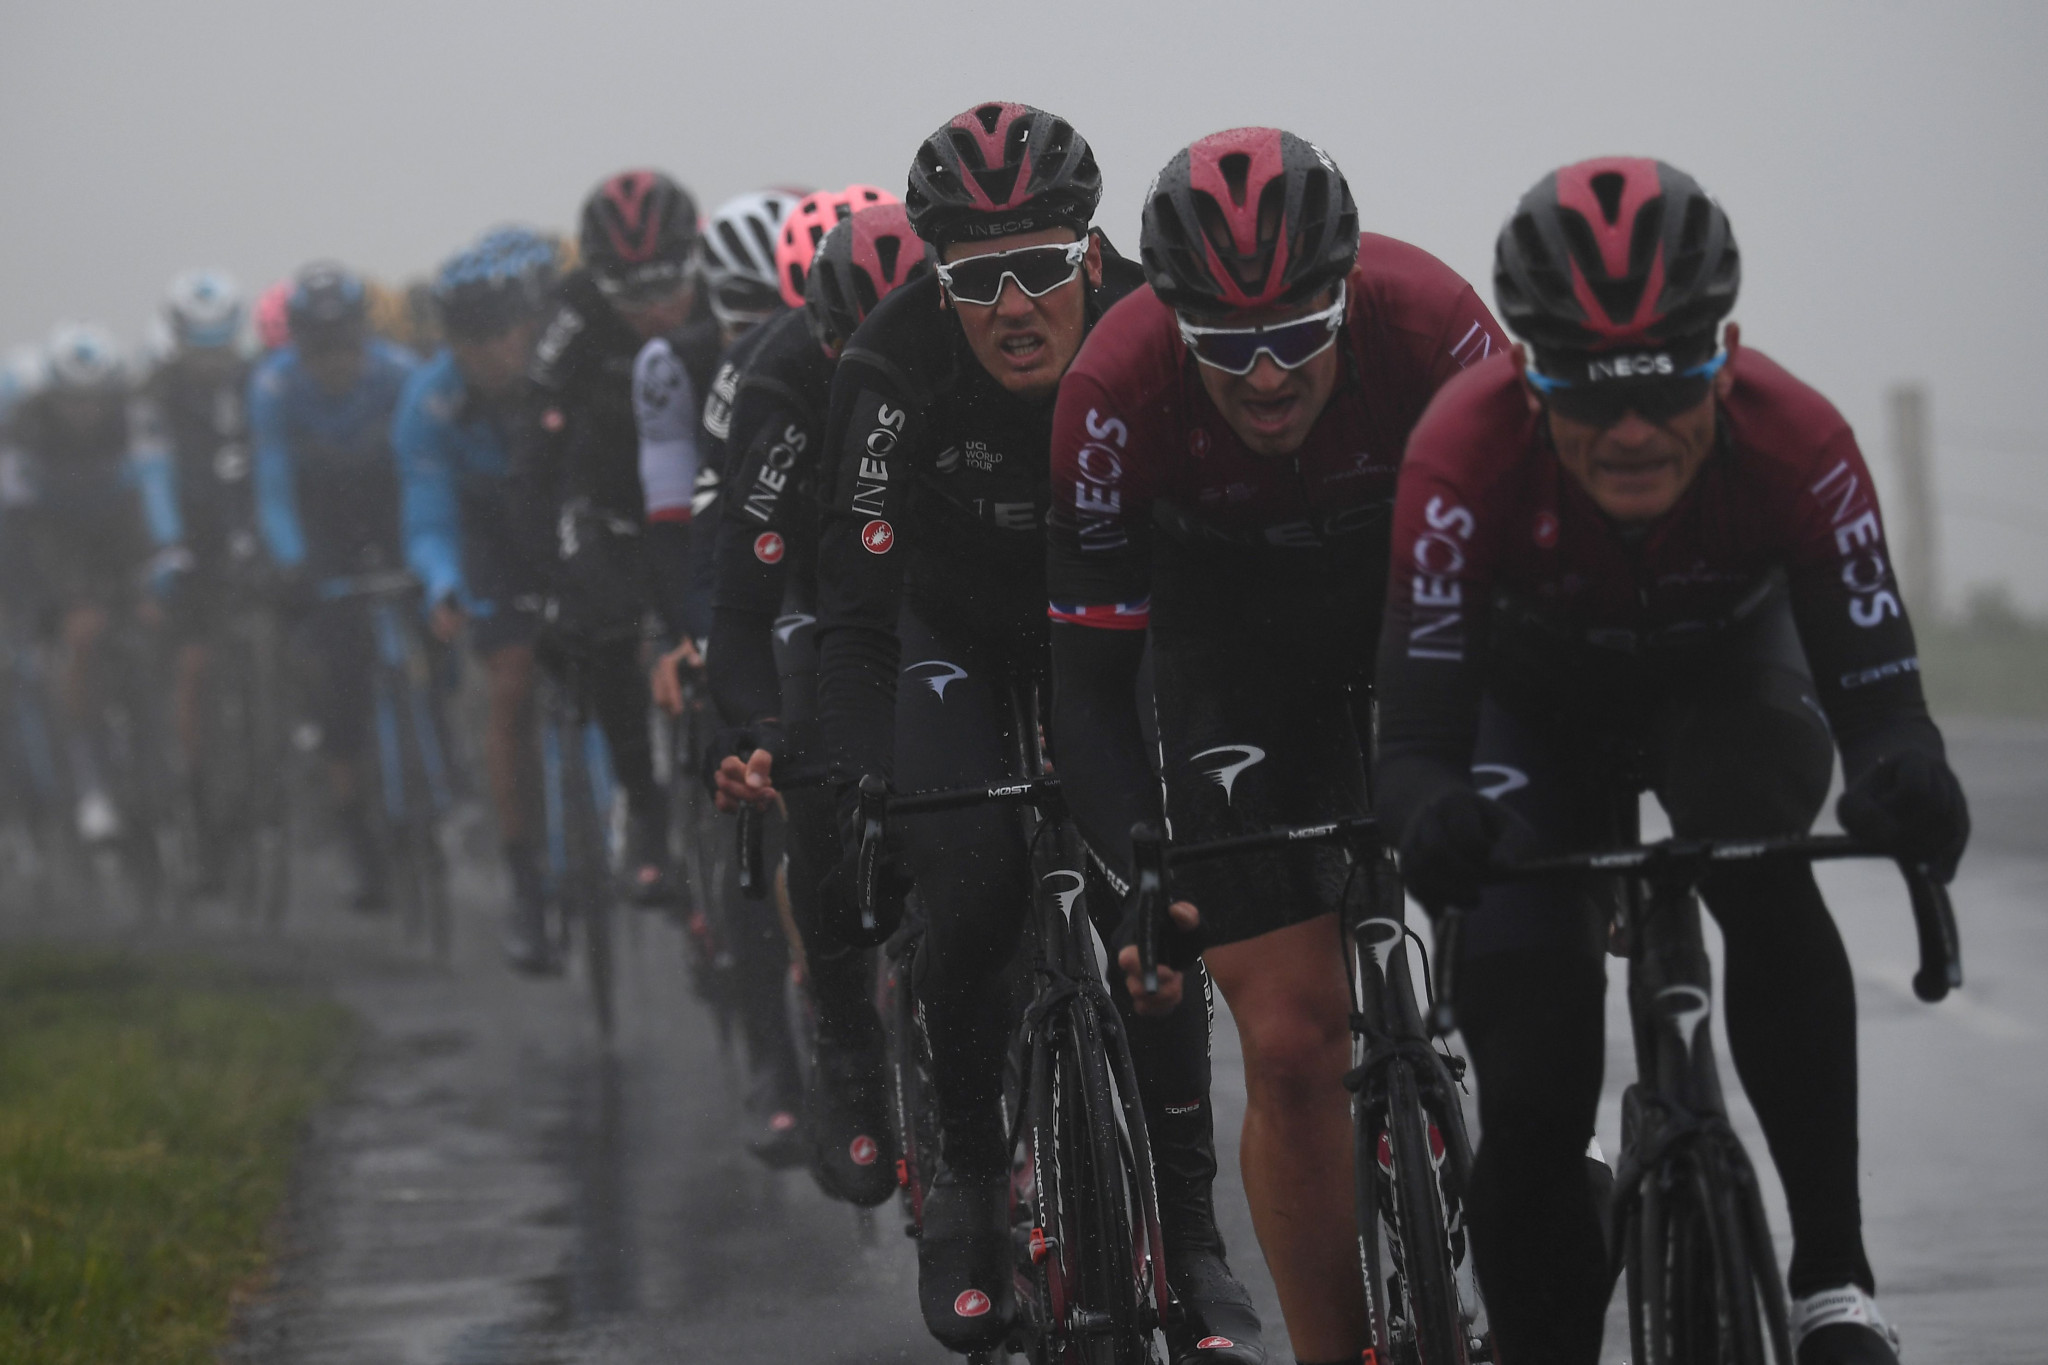 Team Ineos cyclists ride at the front of the peleton in treacherous conditions ©Getty Images